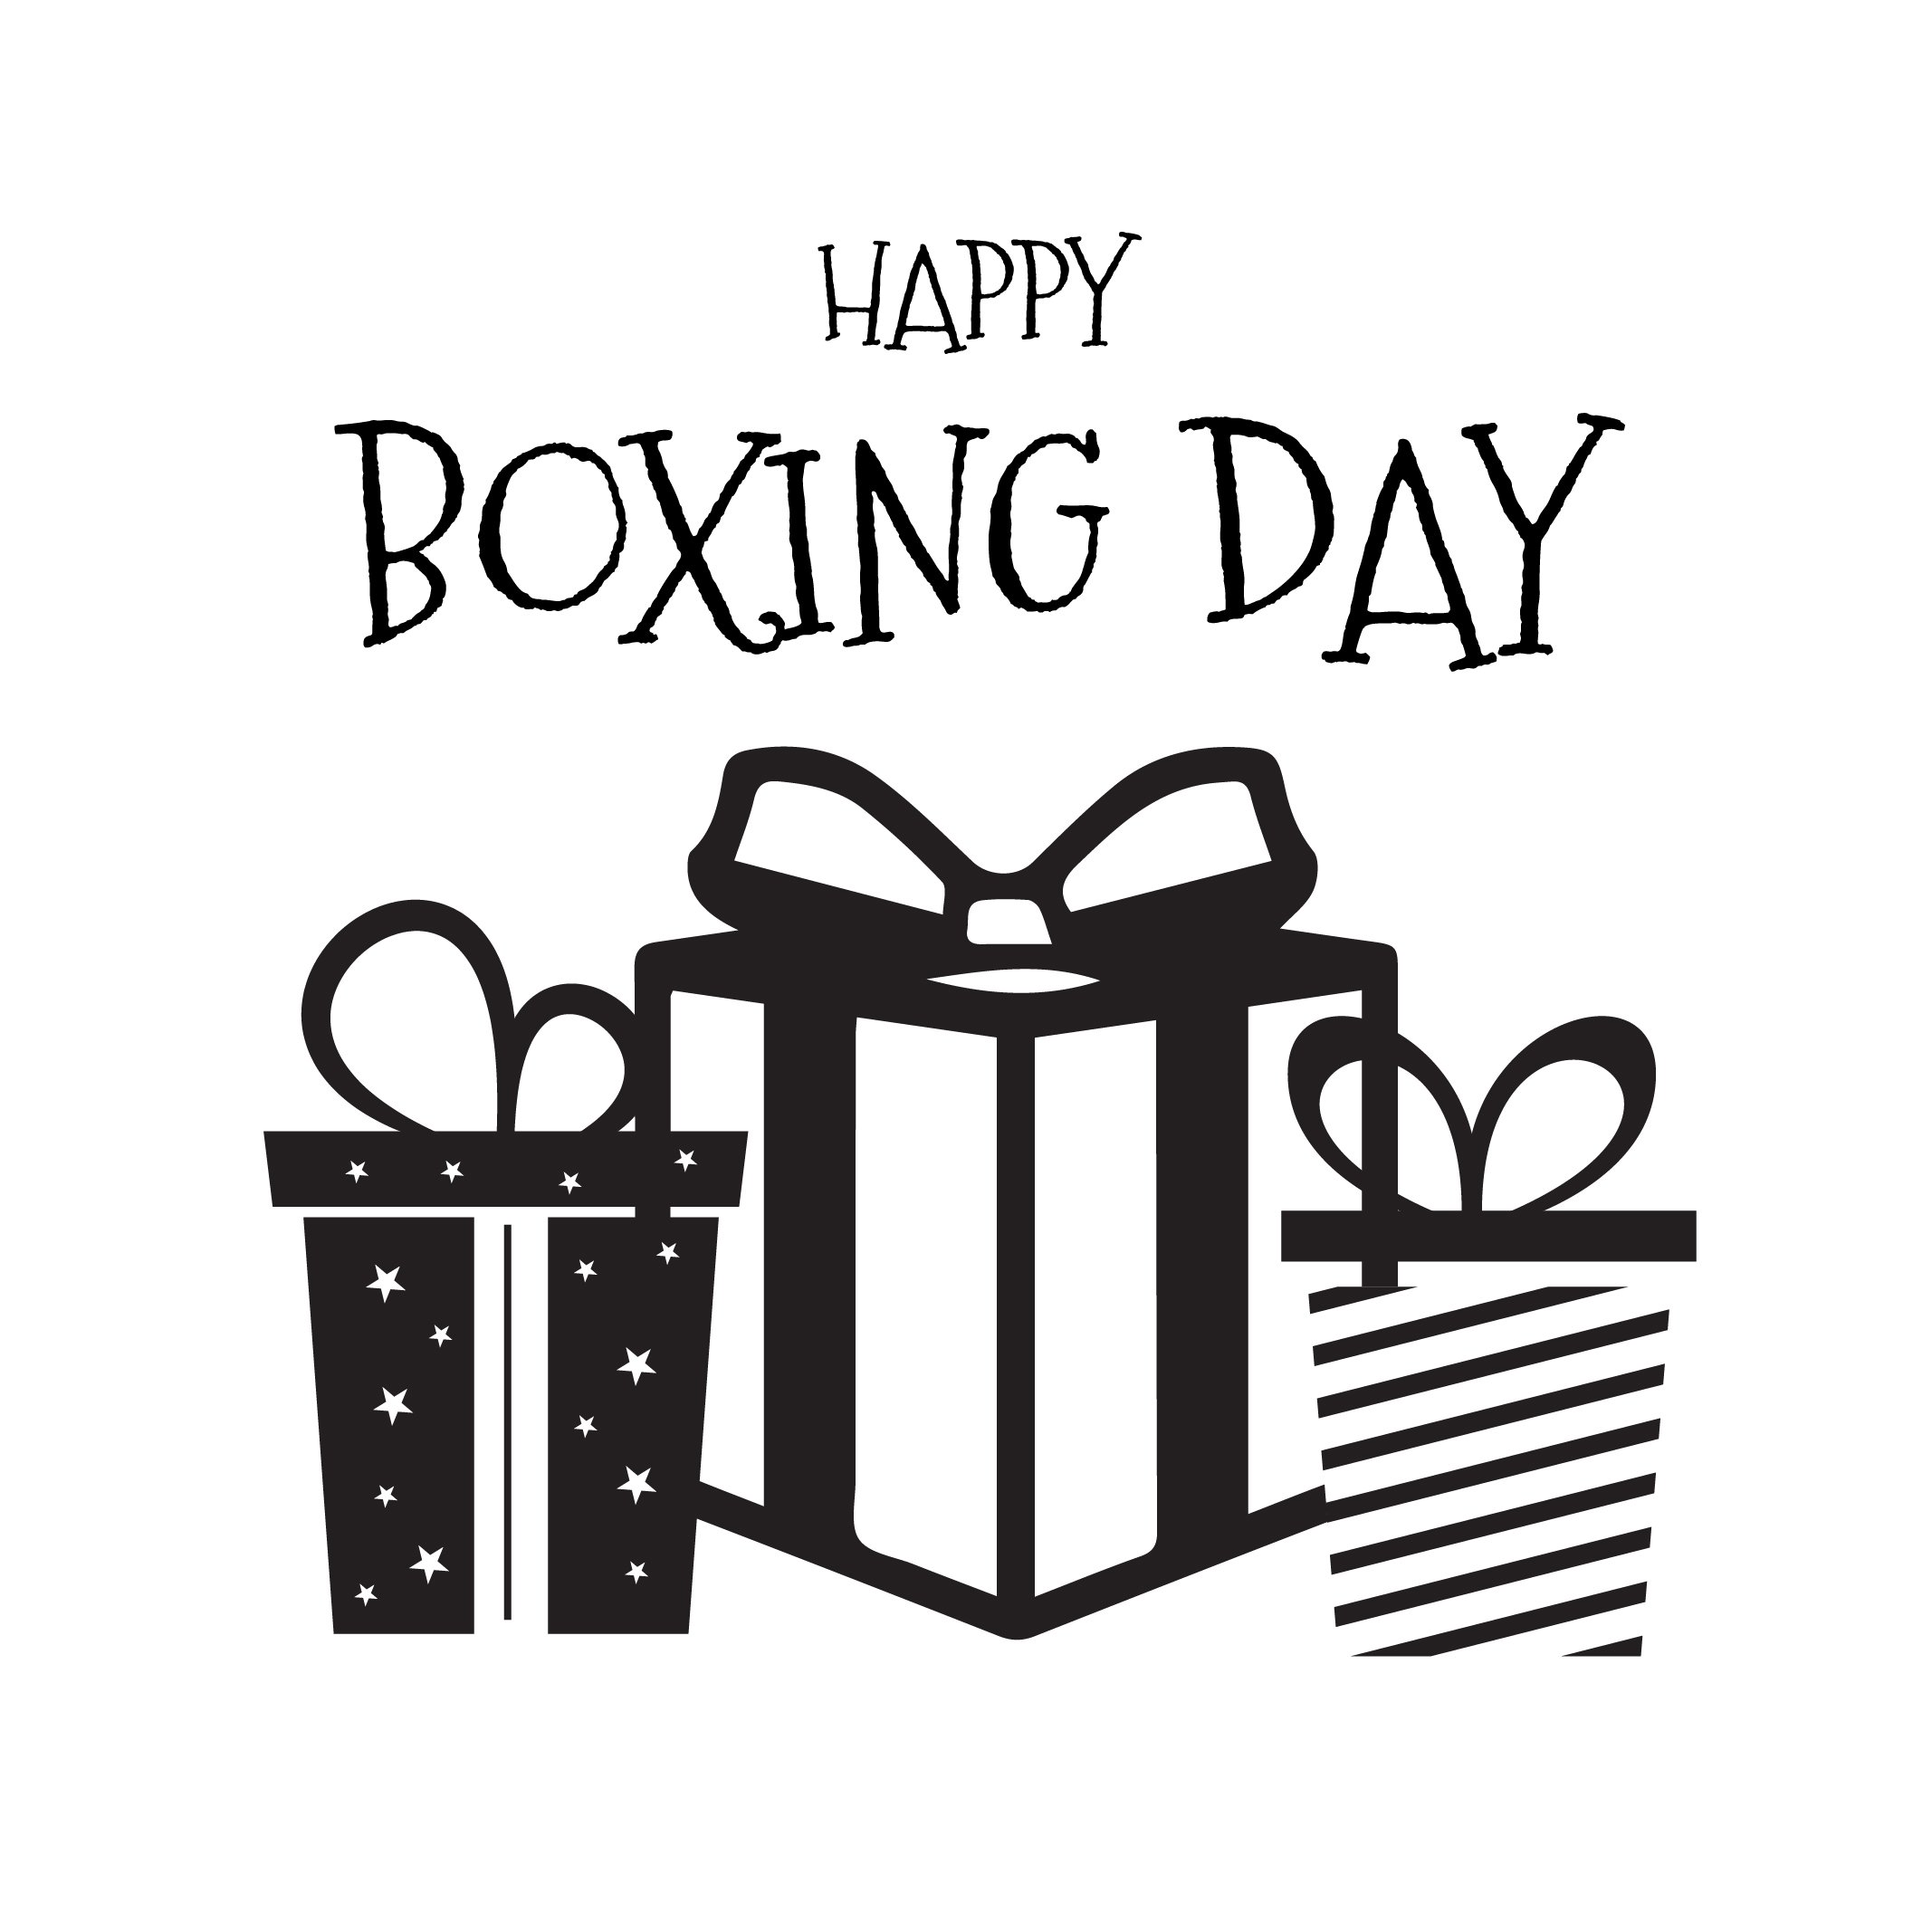 FREE Boxing Day Clipart Image Download in Illustrator, EPS